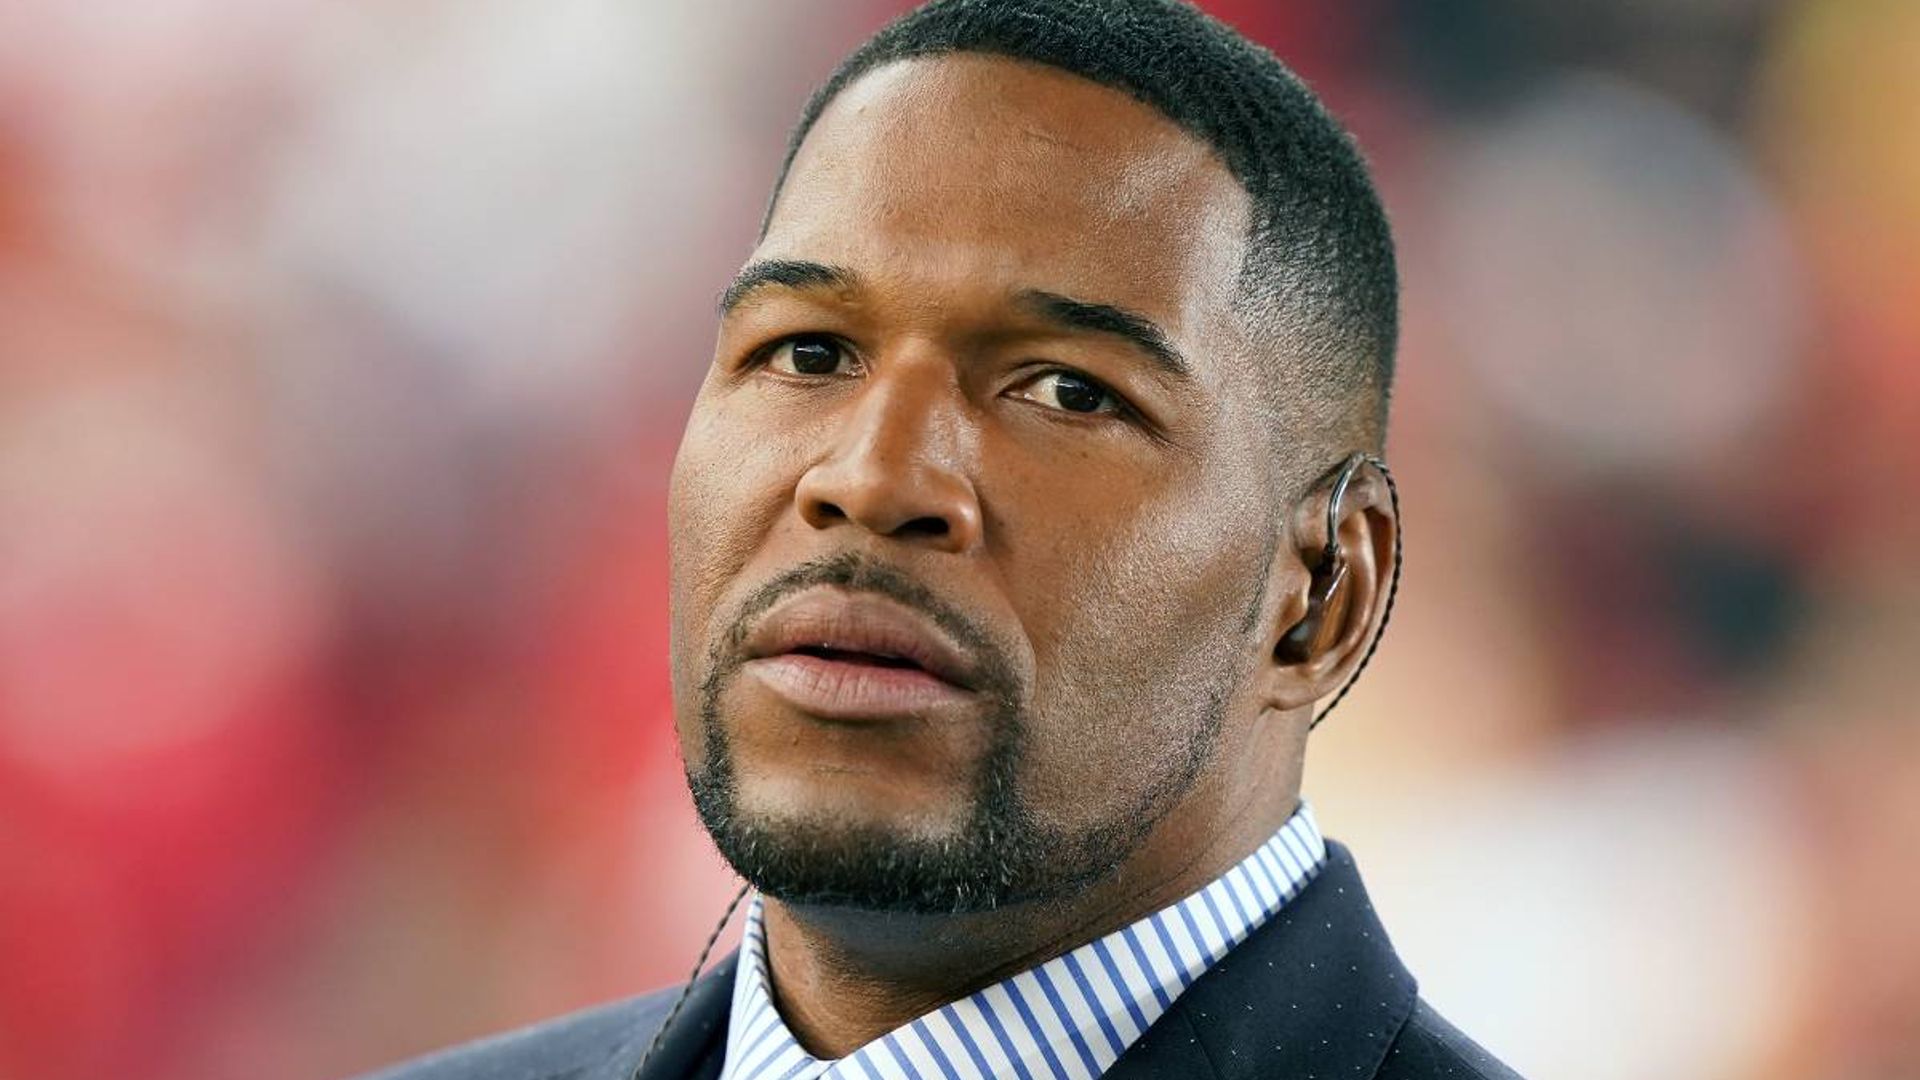 Michael Strahan shares new update following time away from Good Morning America